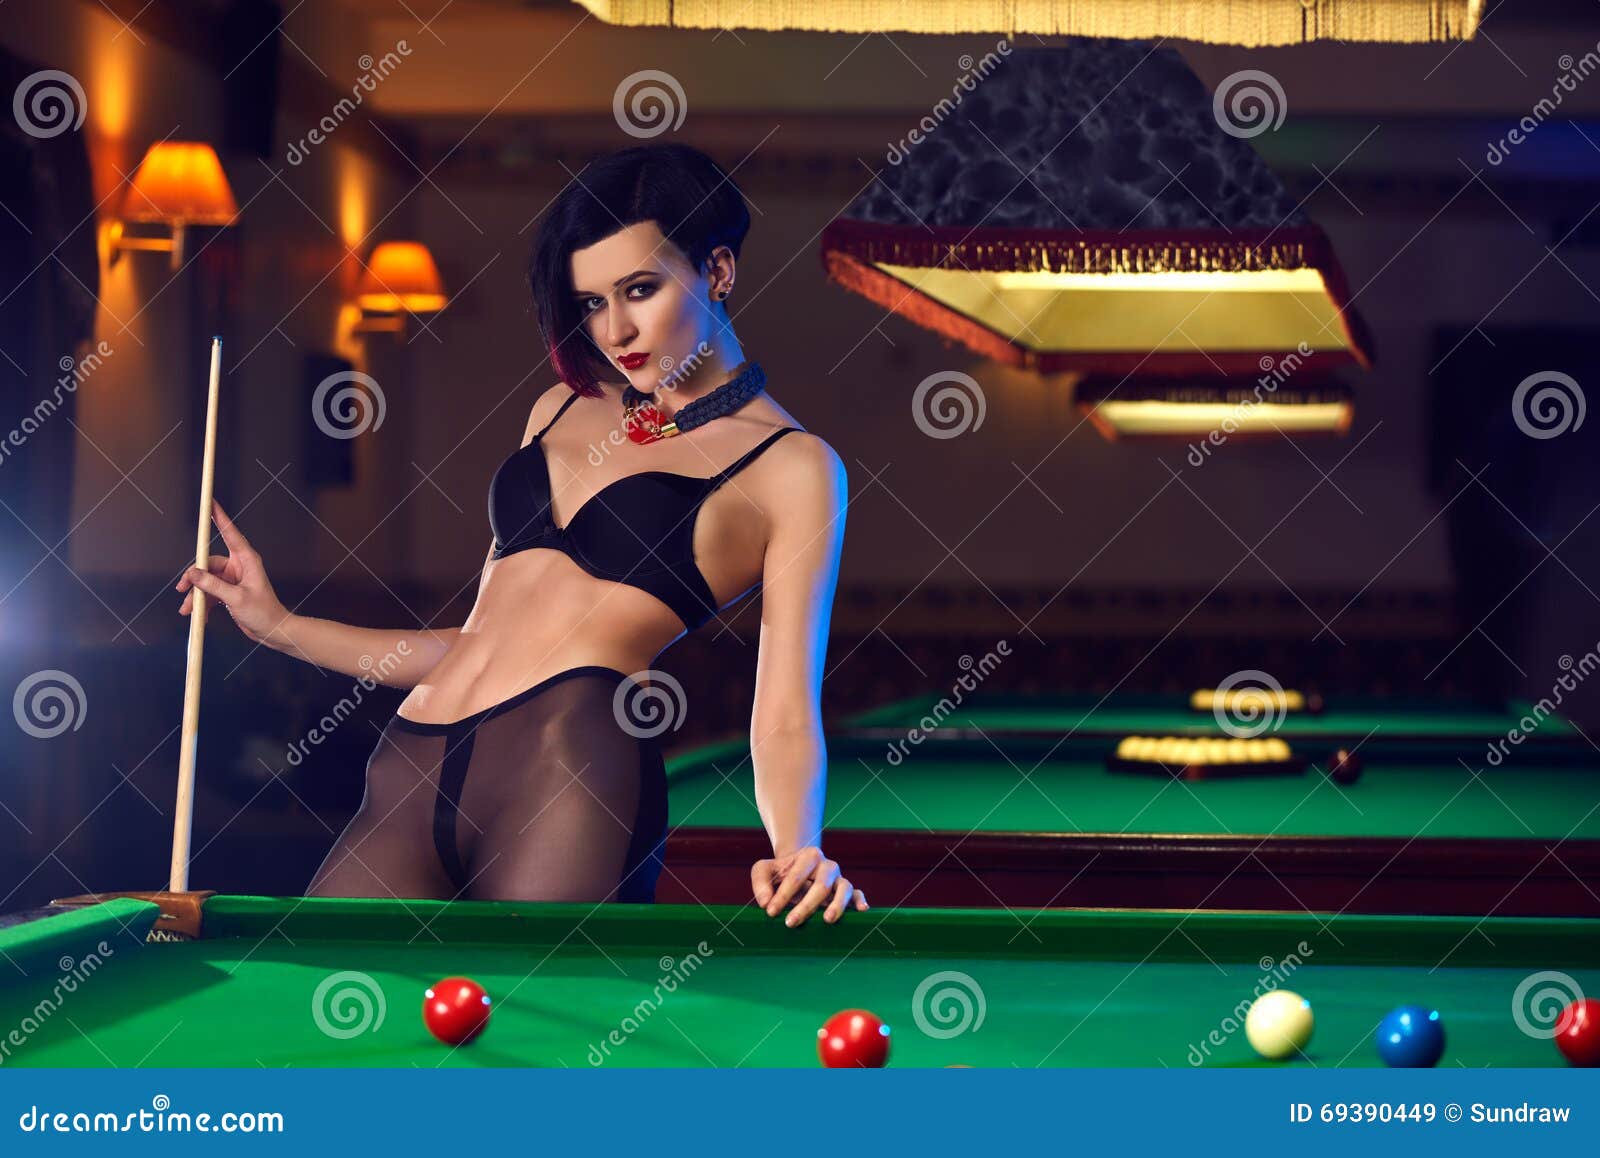 ashleigh hartnett recommends sexy woman playing pool pic